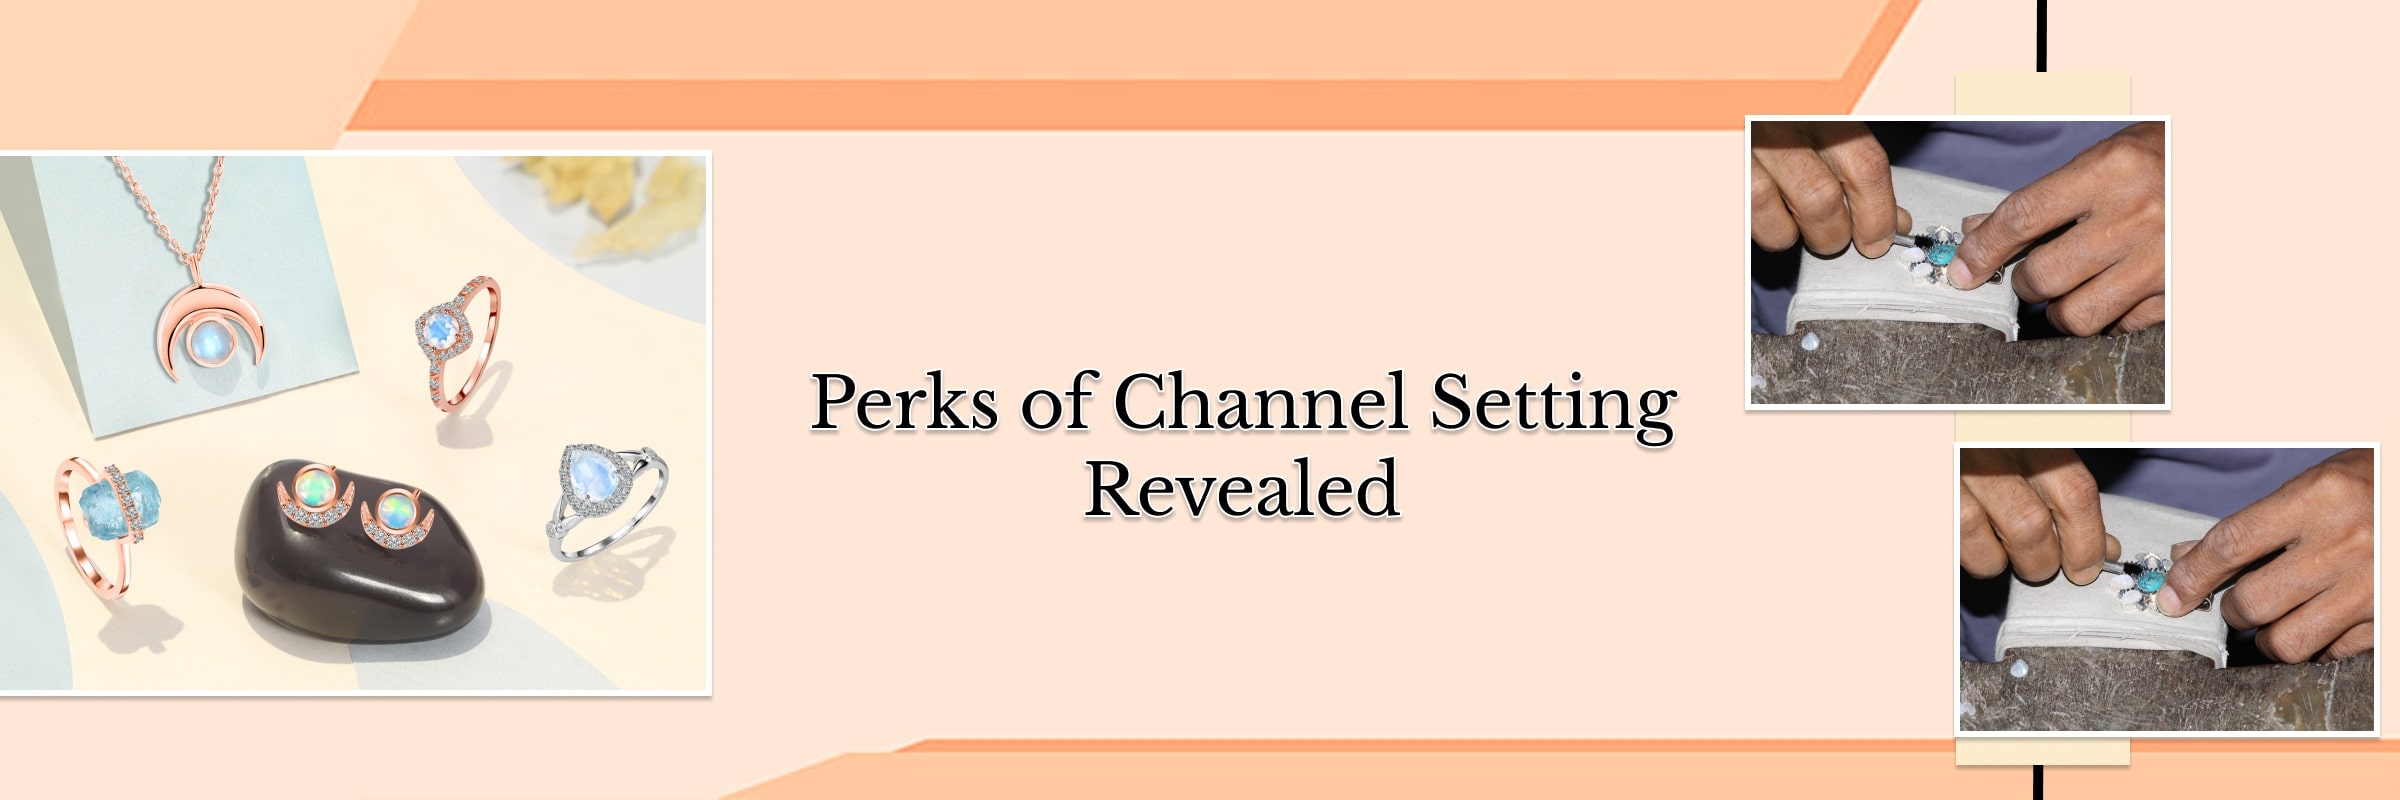 Benefits of Channel Setting